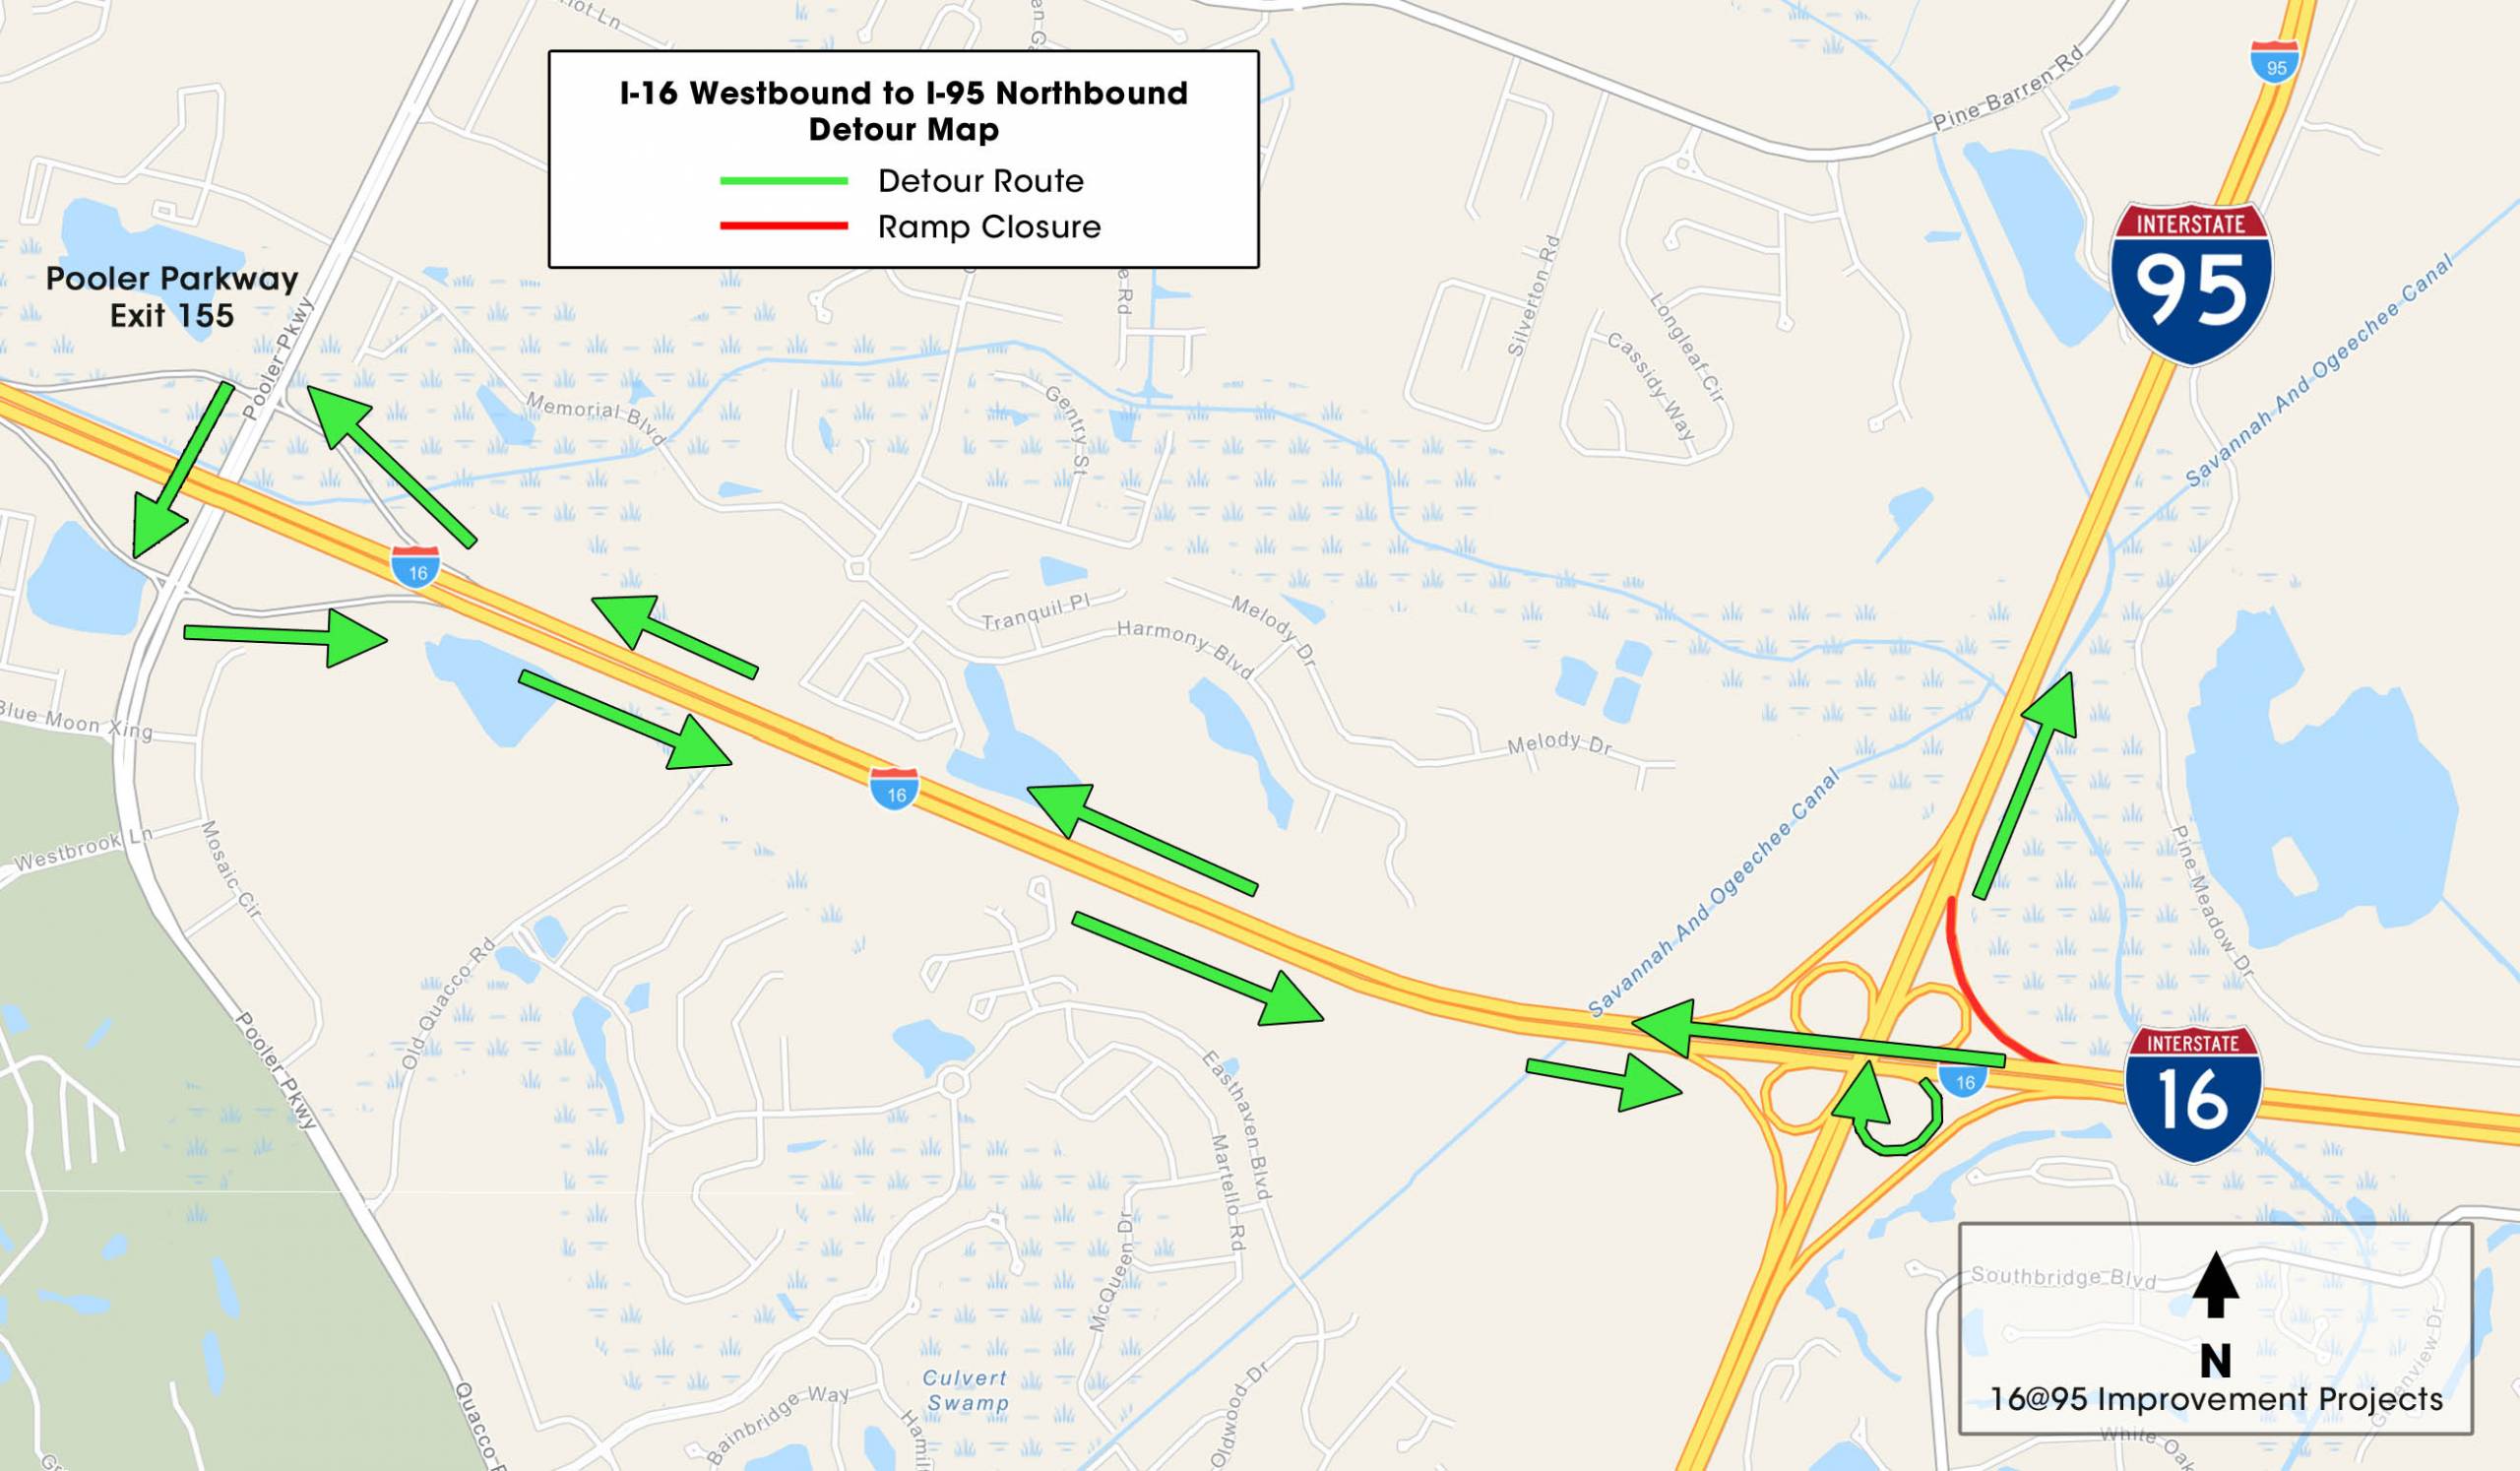 I-16 WB to I-95 NB aug 24